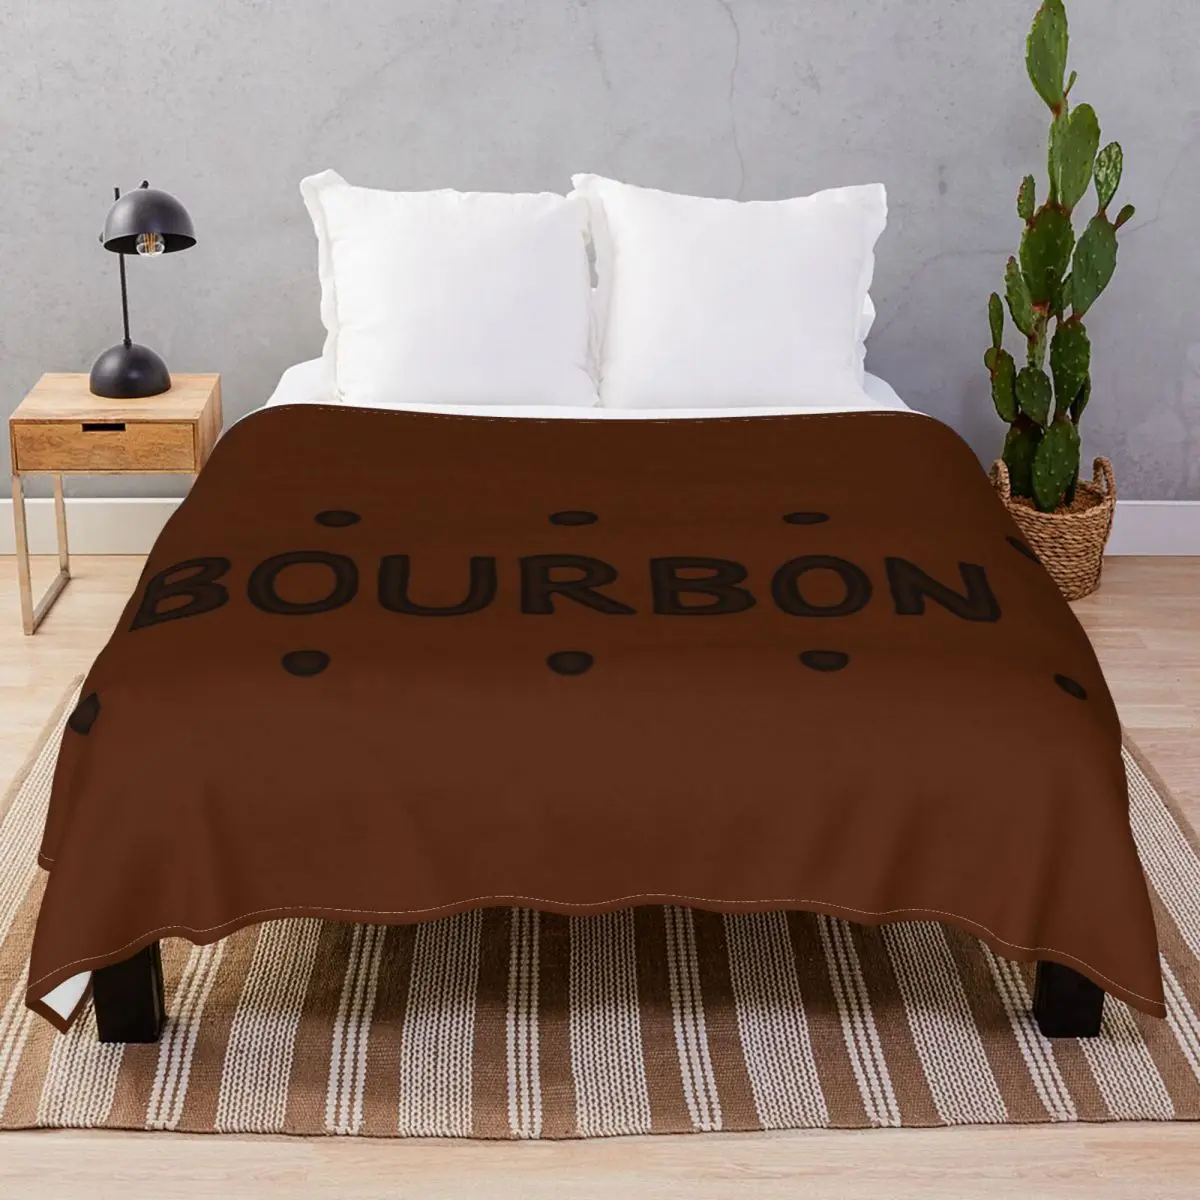 Chocolate Bourbon Biscuit Blanket Velvet Spring Autumn Comfortable Throw Blankets for Bedding Home Couch Travel Cinema